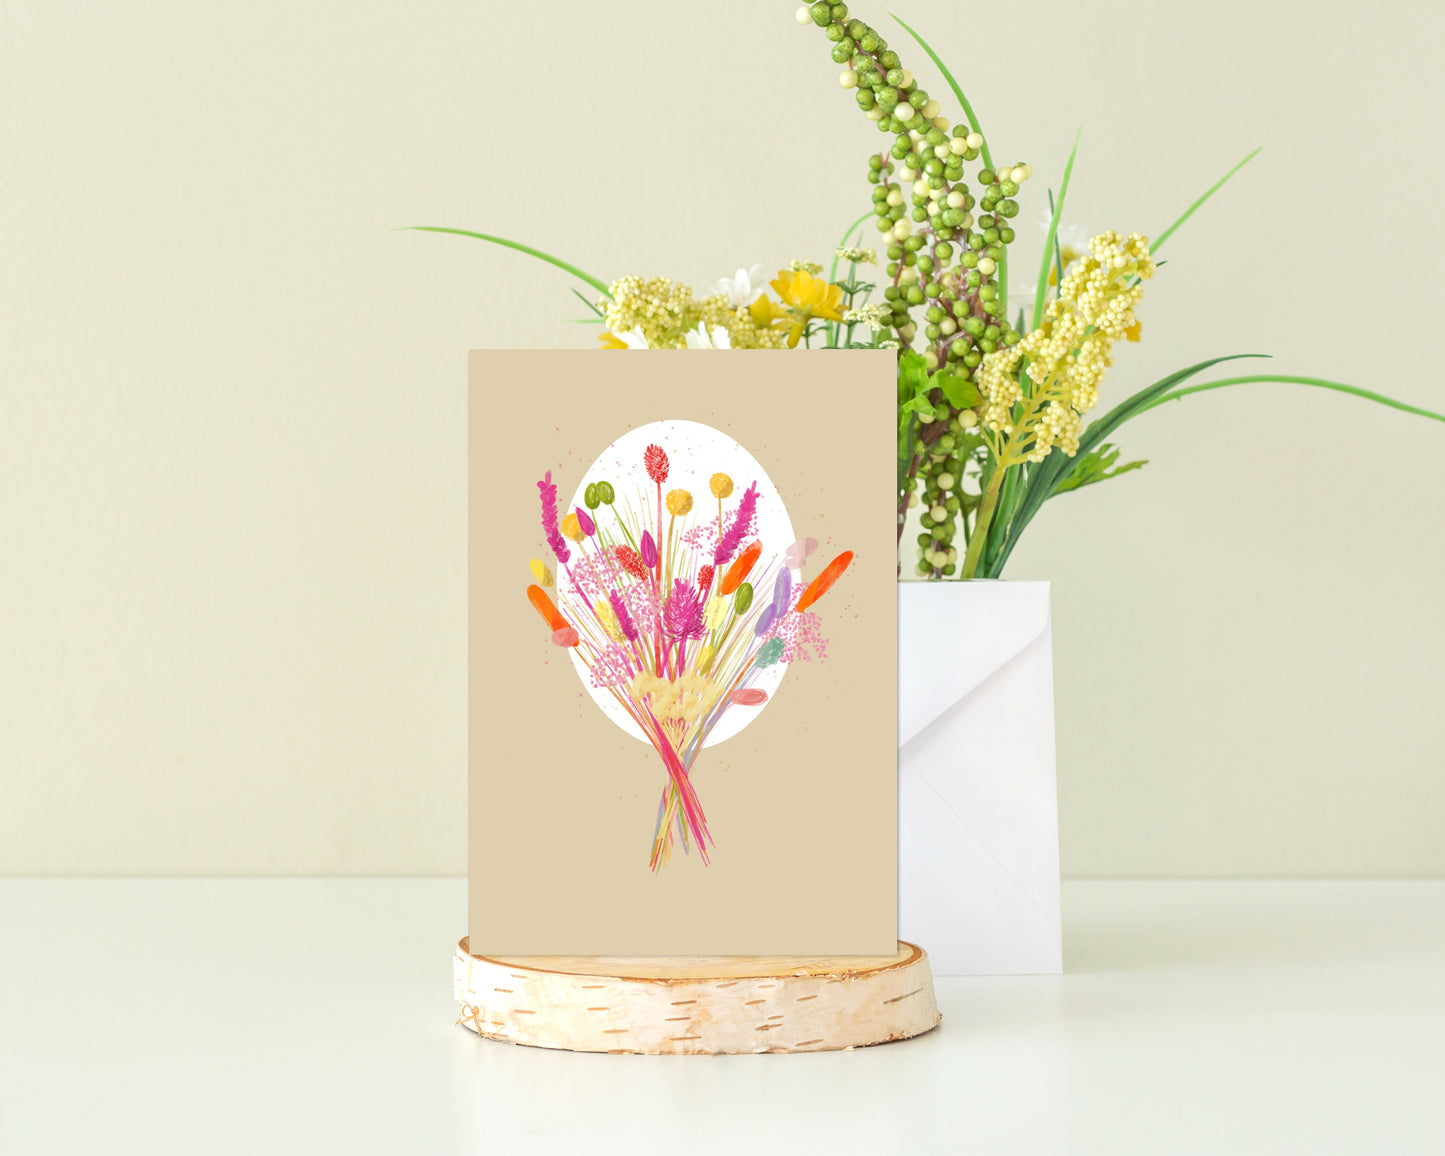 Vibrant Flower Bouquet Greeting Card